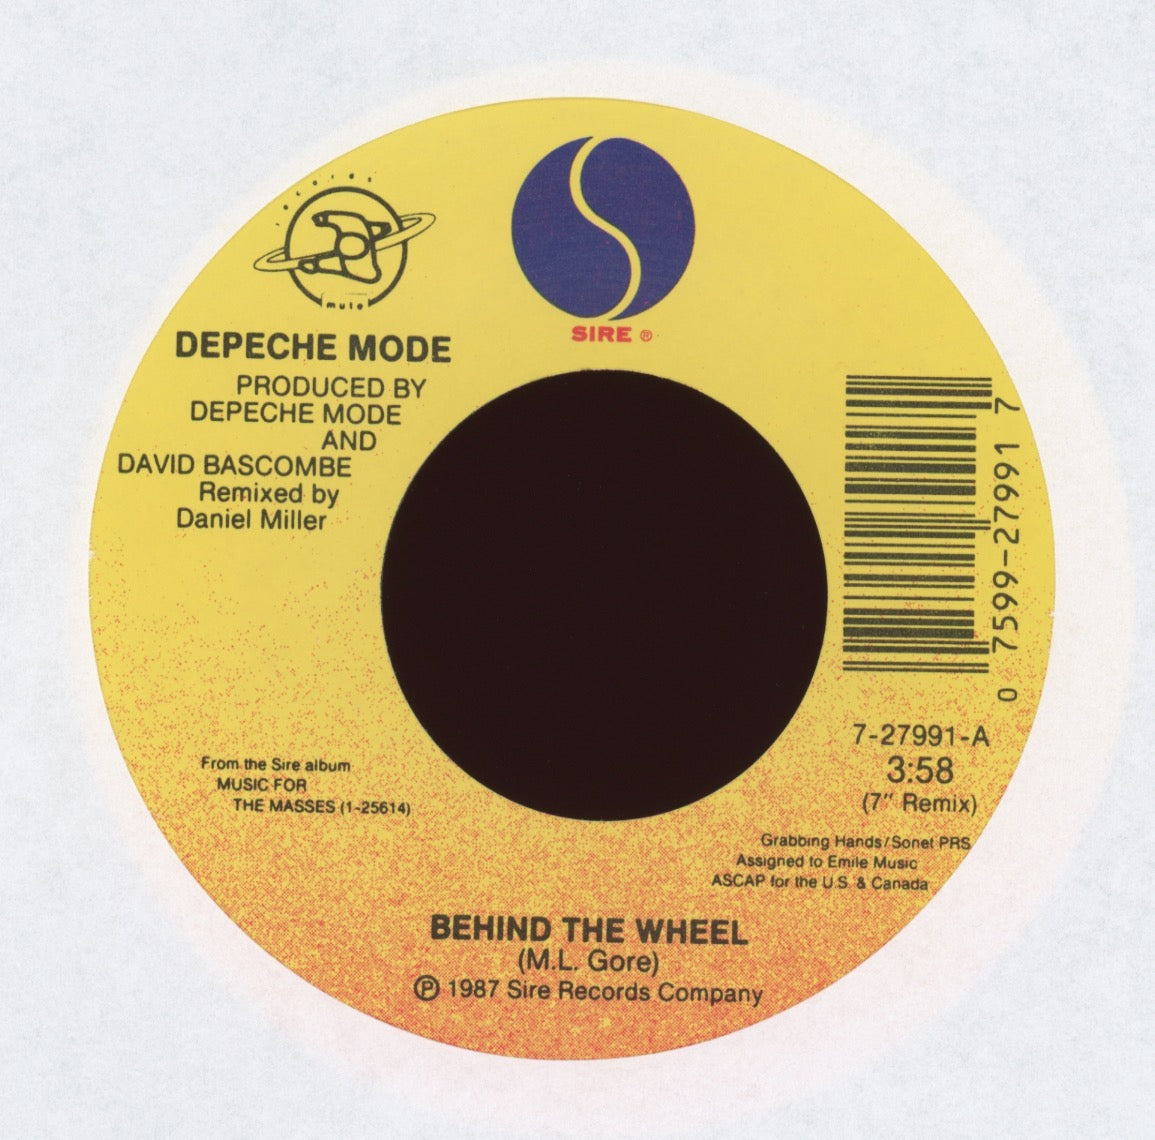 Depeche Mode - Behind The Wheel on Sire With Picture Sleeve